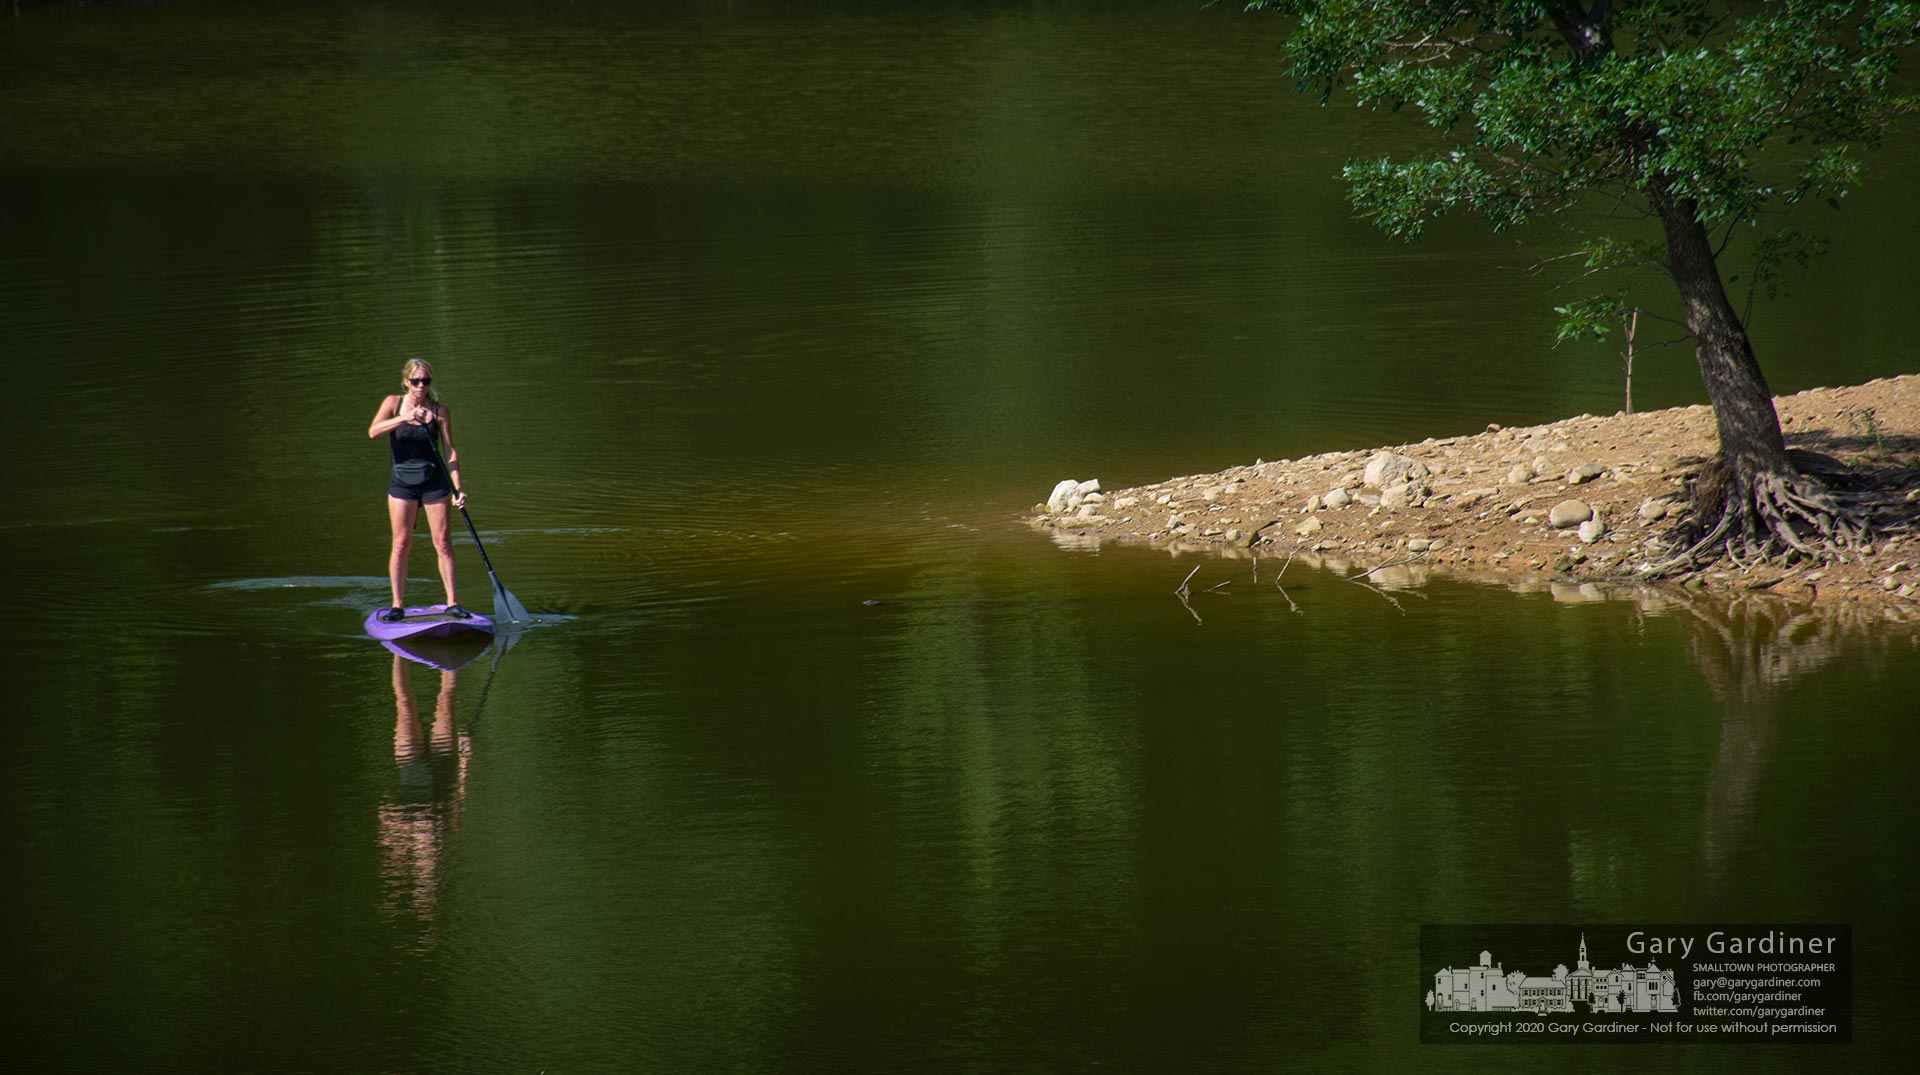 A paddleboarder rounds a small point of land on her way to the Red Bank Road bridge where the boat landing awaits. My Final Photo for July 26, 2020.